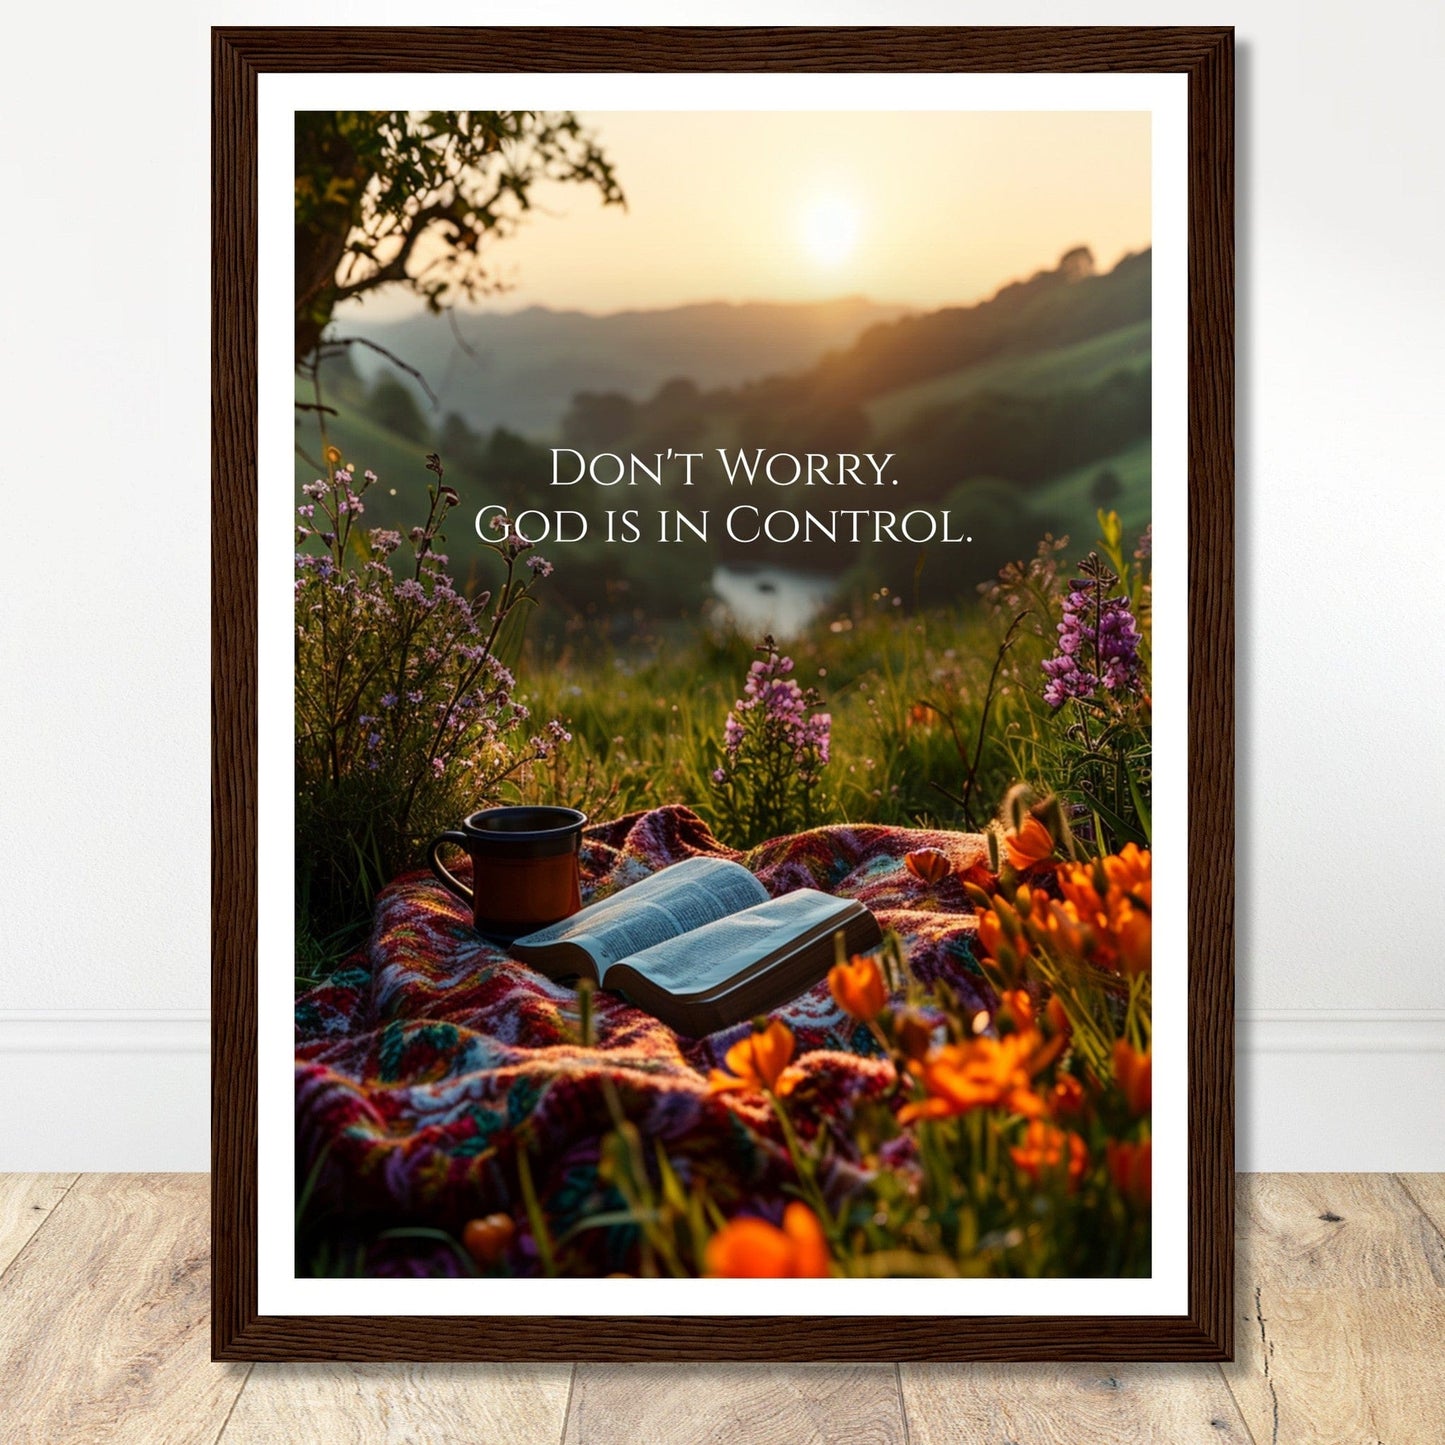 Coffee With My Father Print Material 30x40 cm / 12x16″ / Dark wood frame Premium Matte Paper Wooden Framed Poster